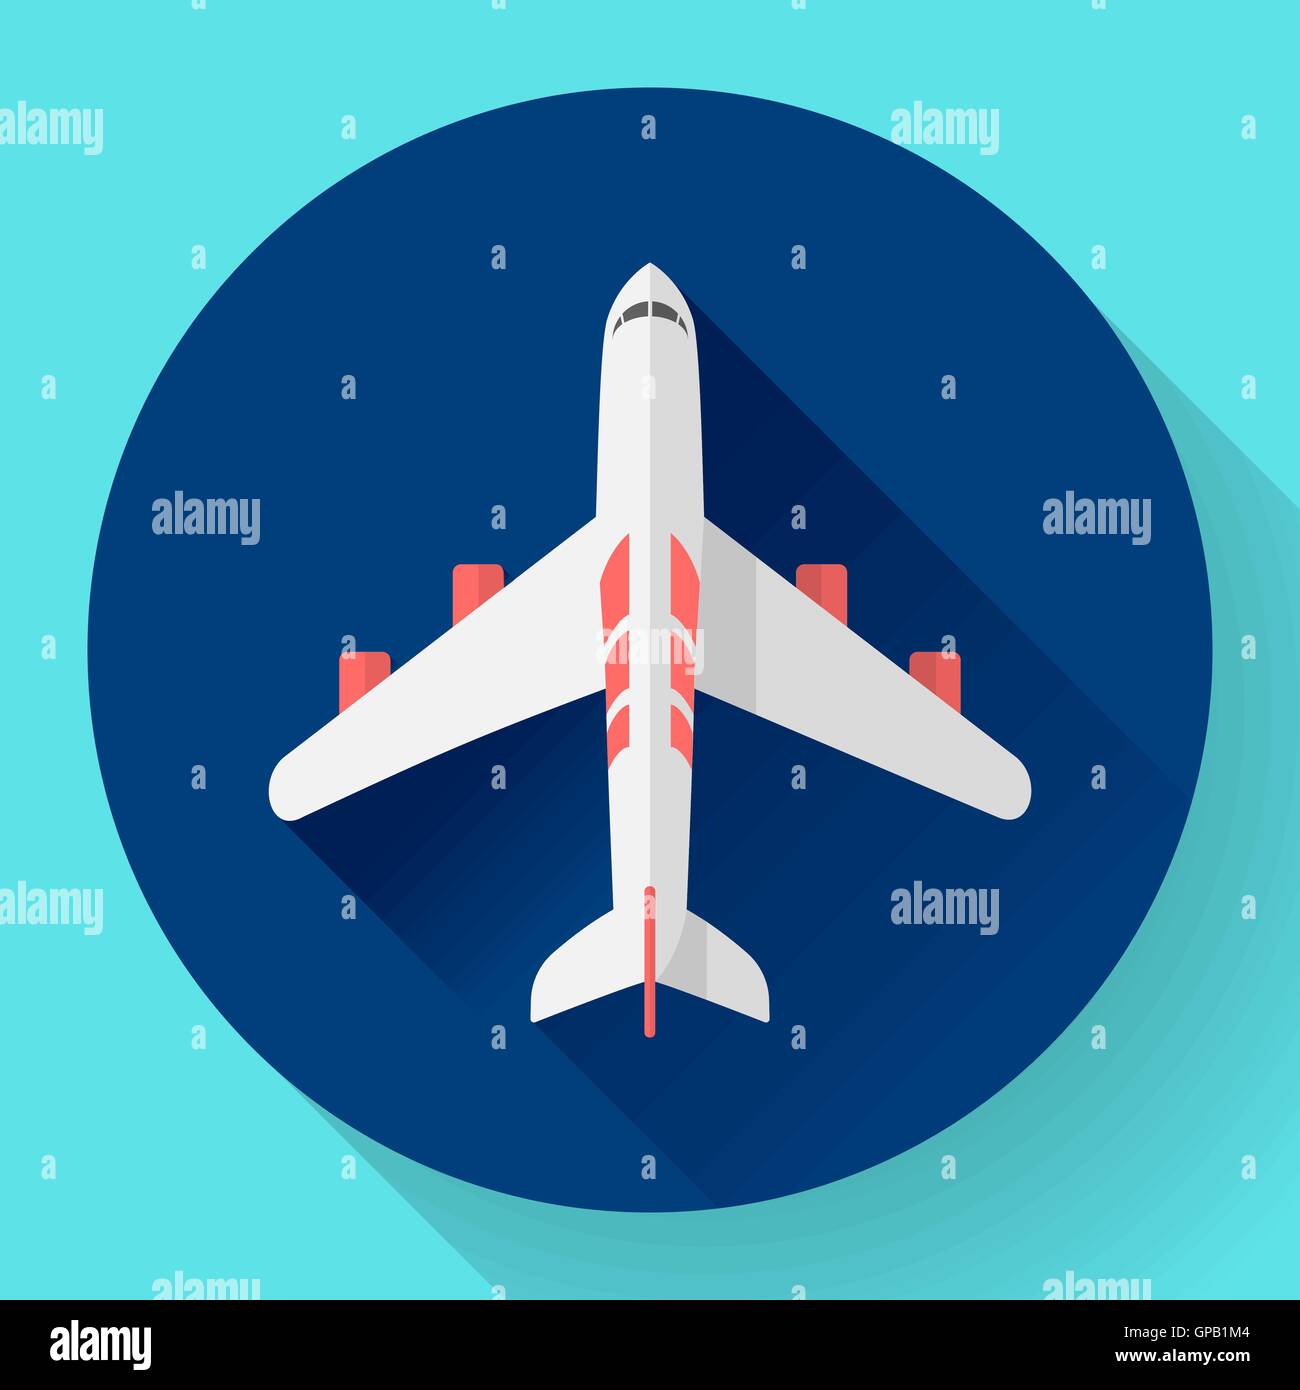 Airplane - vector icon illustration. Flat design style. Stock Vector